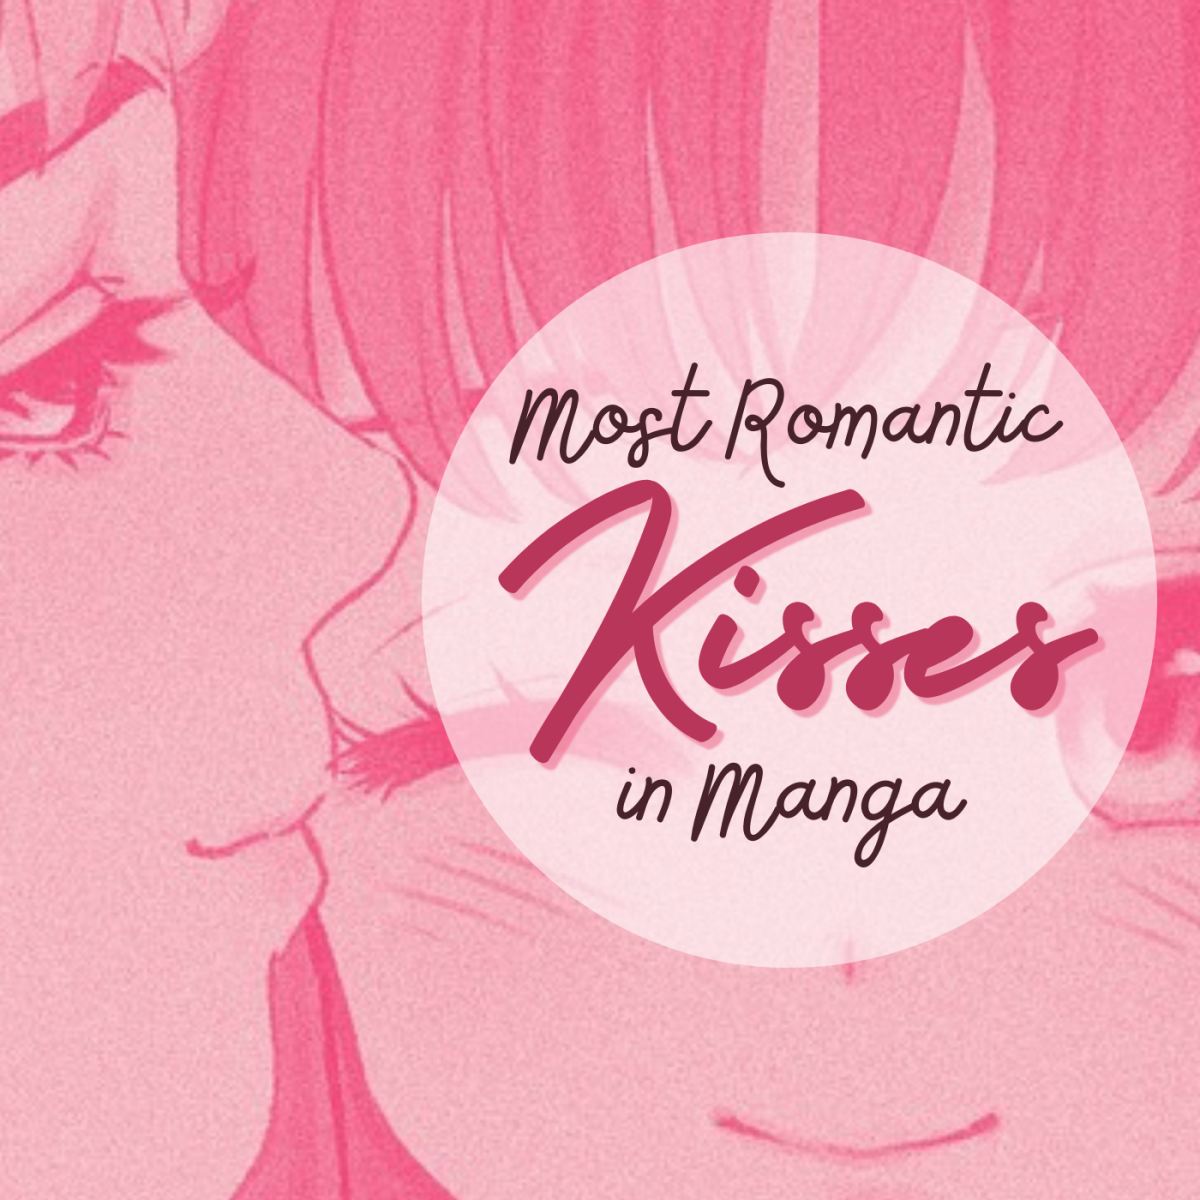 Ooh, the romance! This is a list of my favorite kissing scenes from the manga and manhwa I've read.